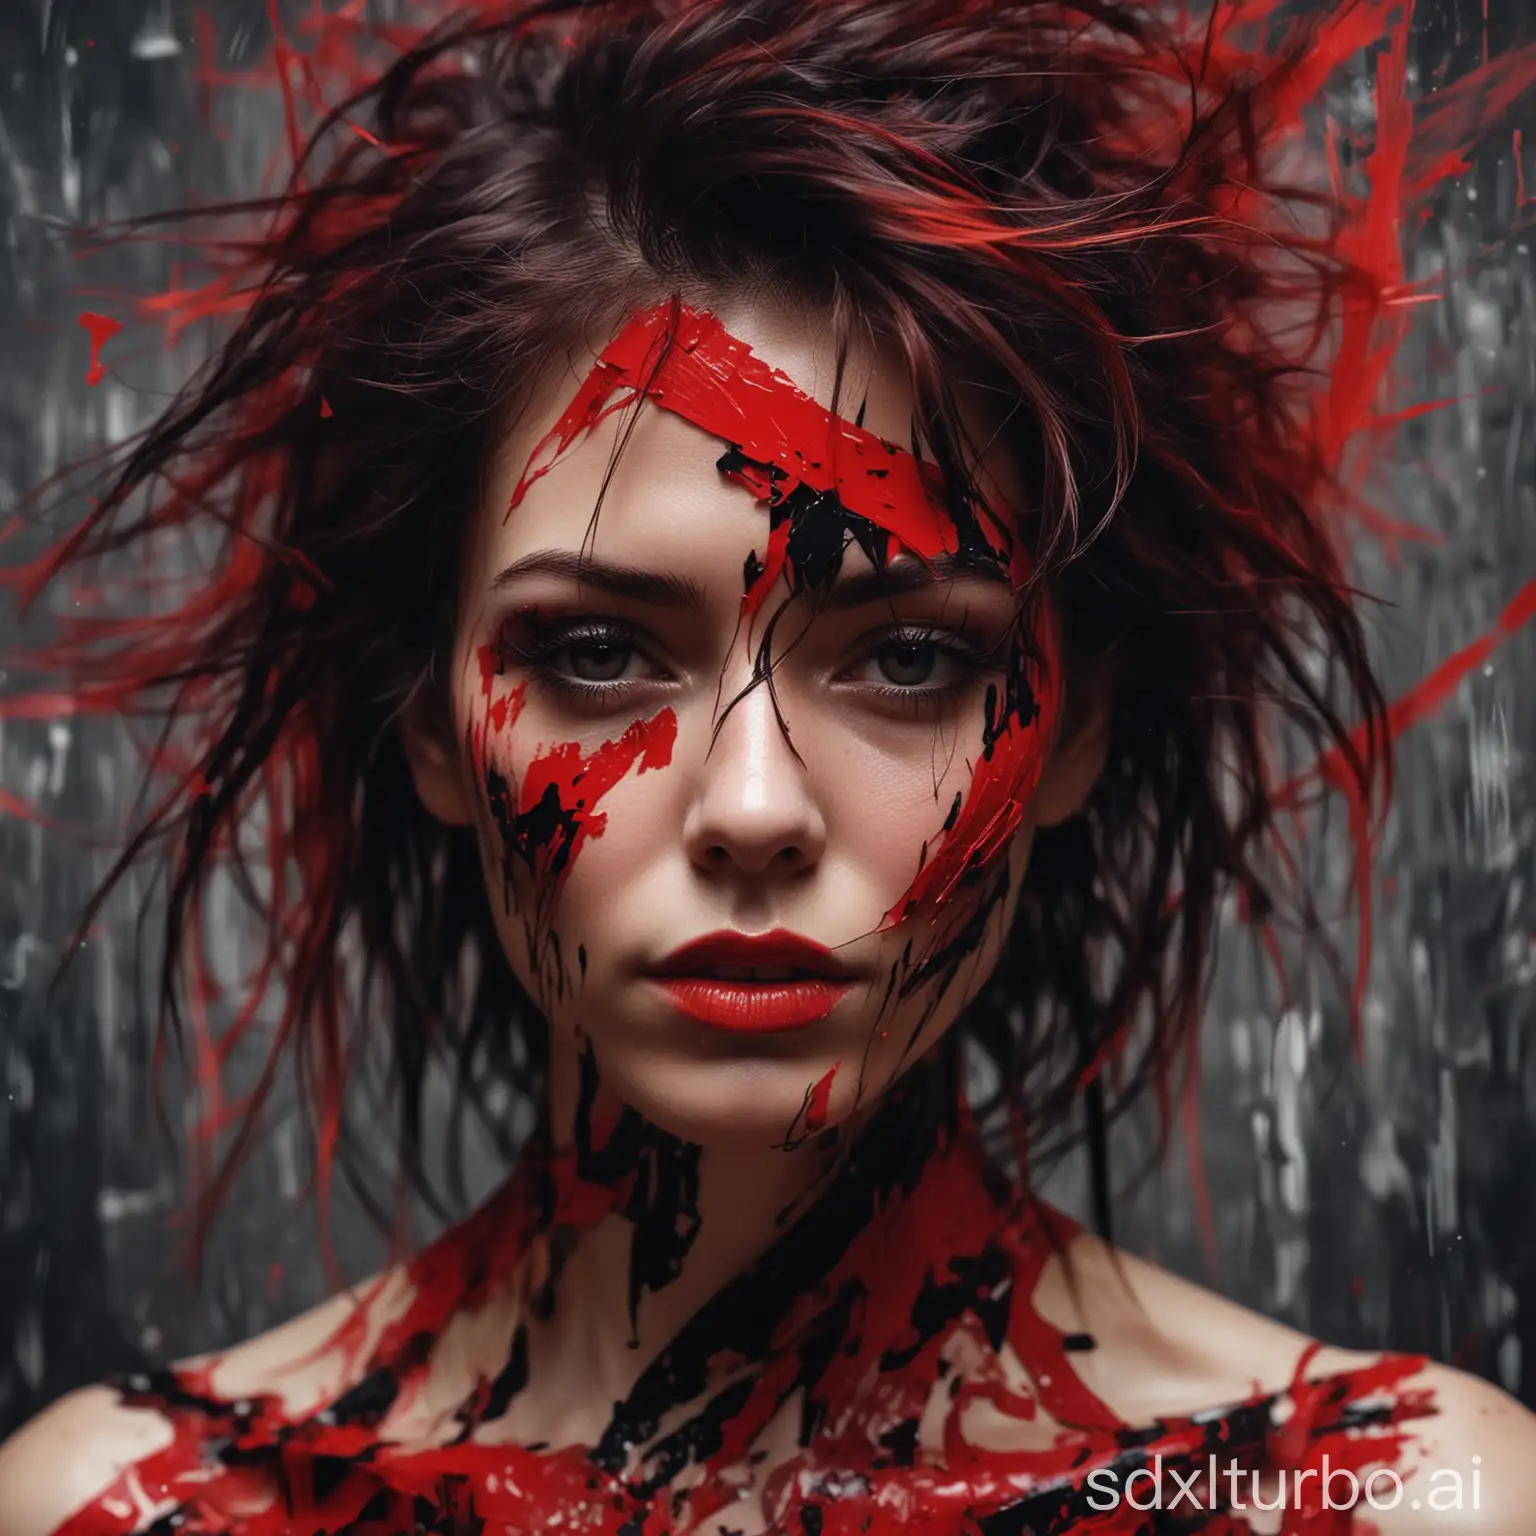 abstract female portrait,undefined hair,red and black color palette,blurred boundaries,upper body,fragmented visual style,evokes feelings of rebellion and passion